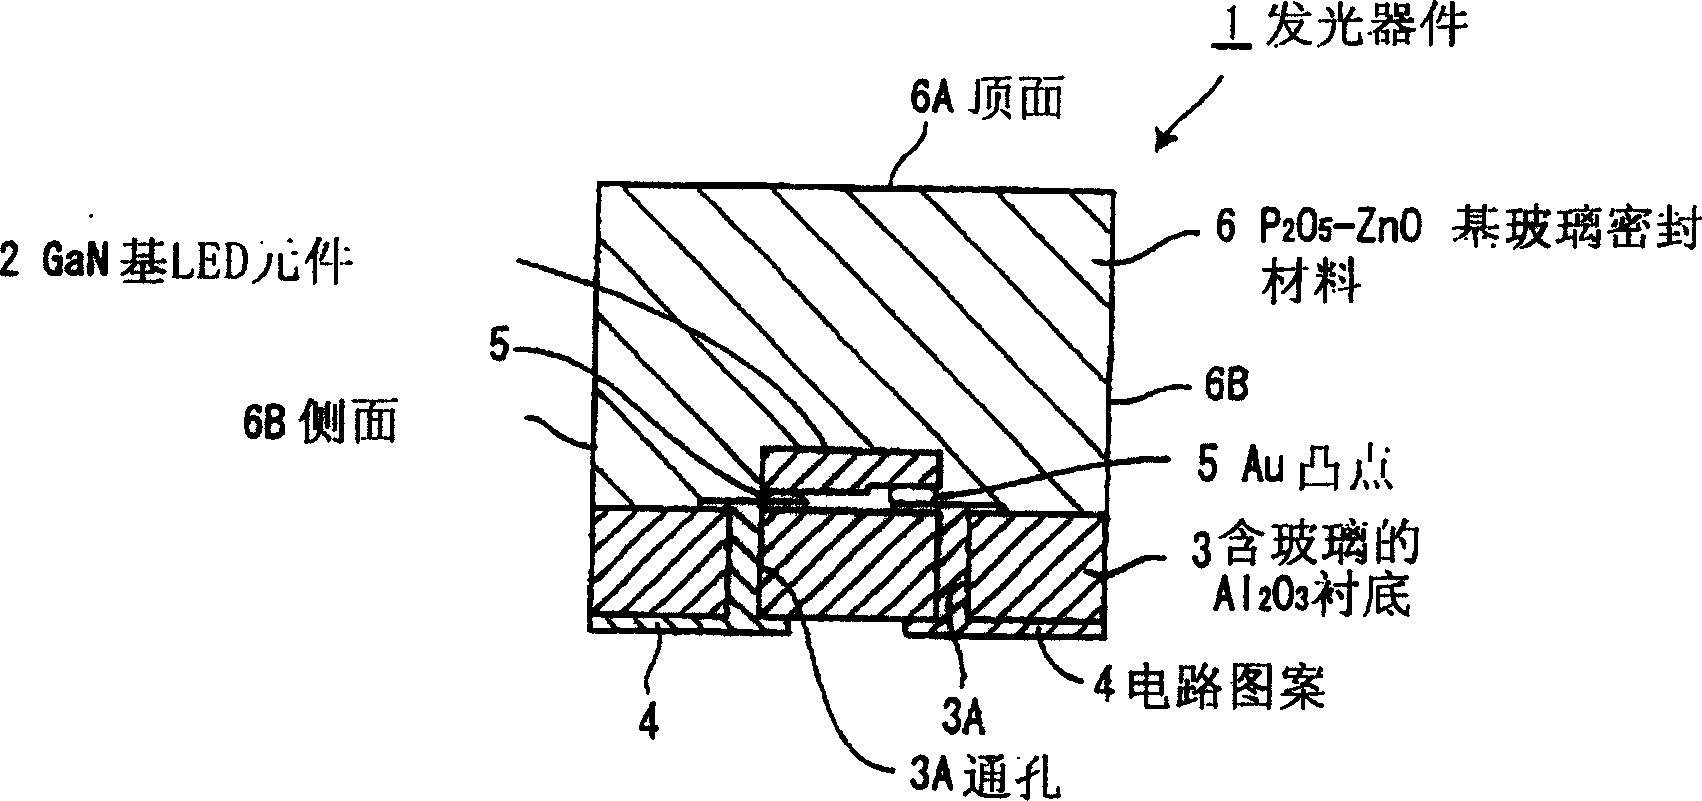 Solid-state optical device